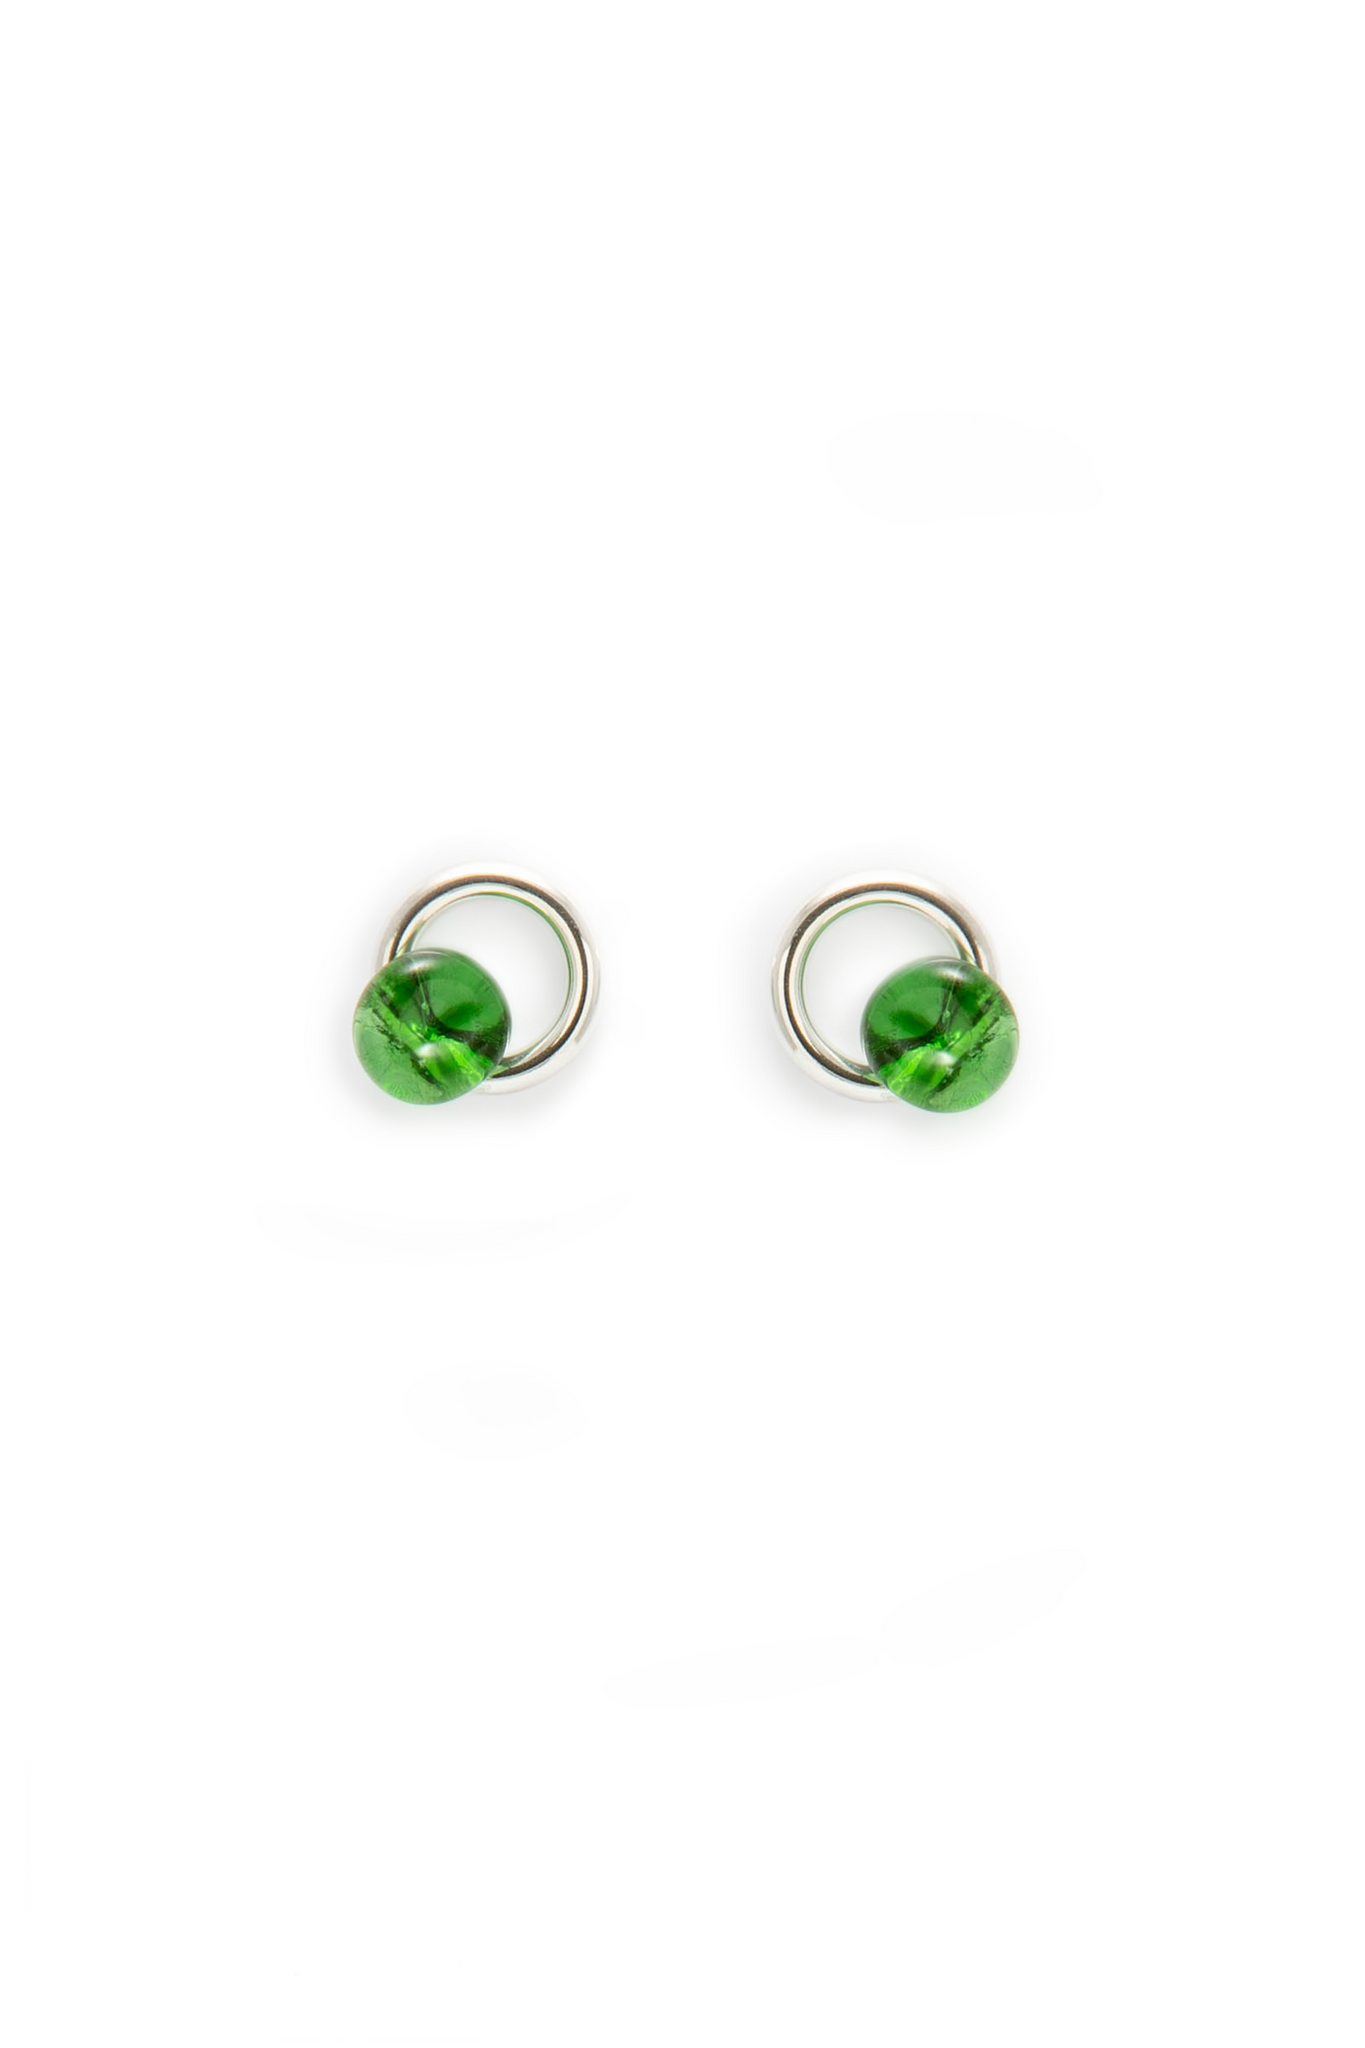 Ethical recycled silver earrings with green upcycled glass